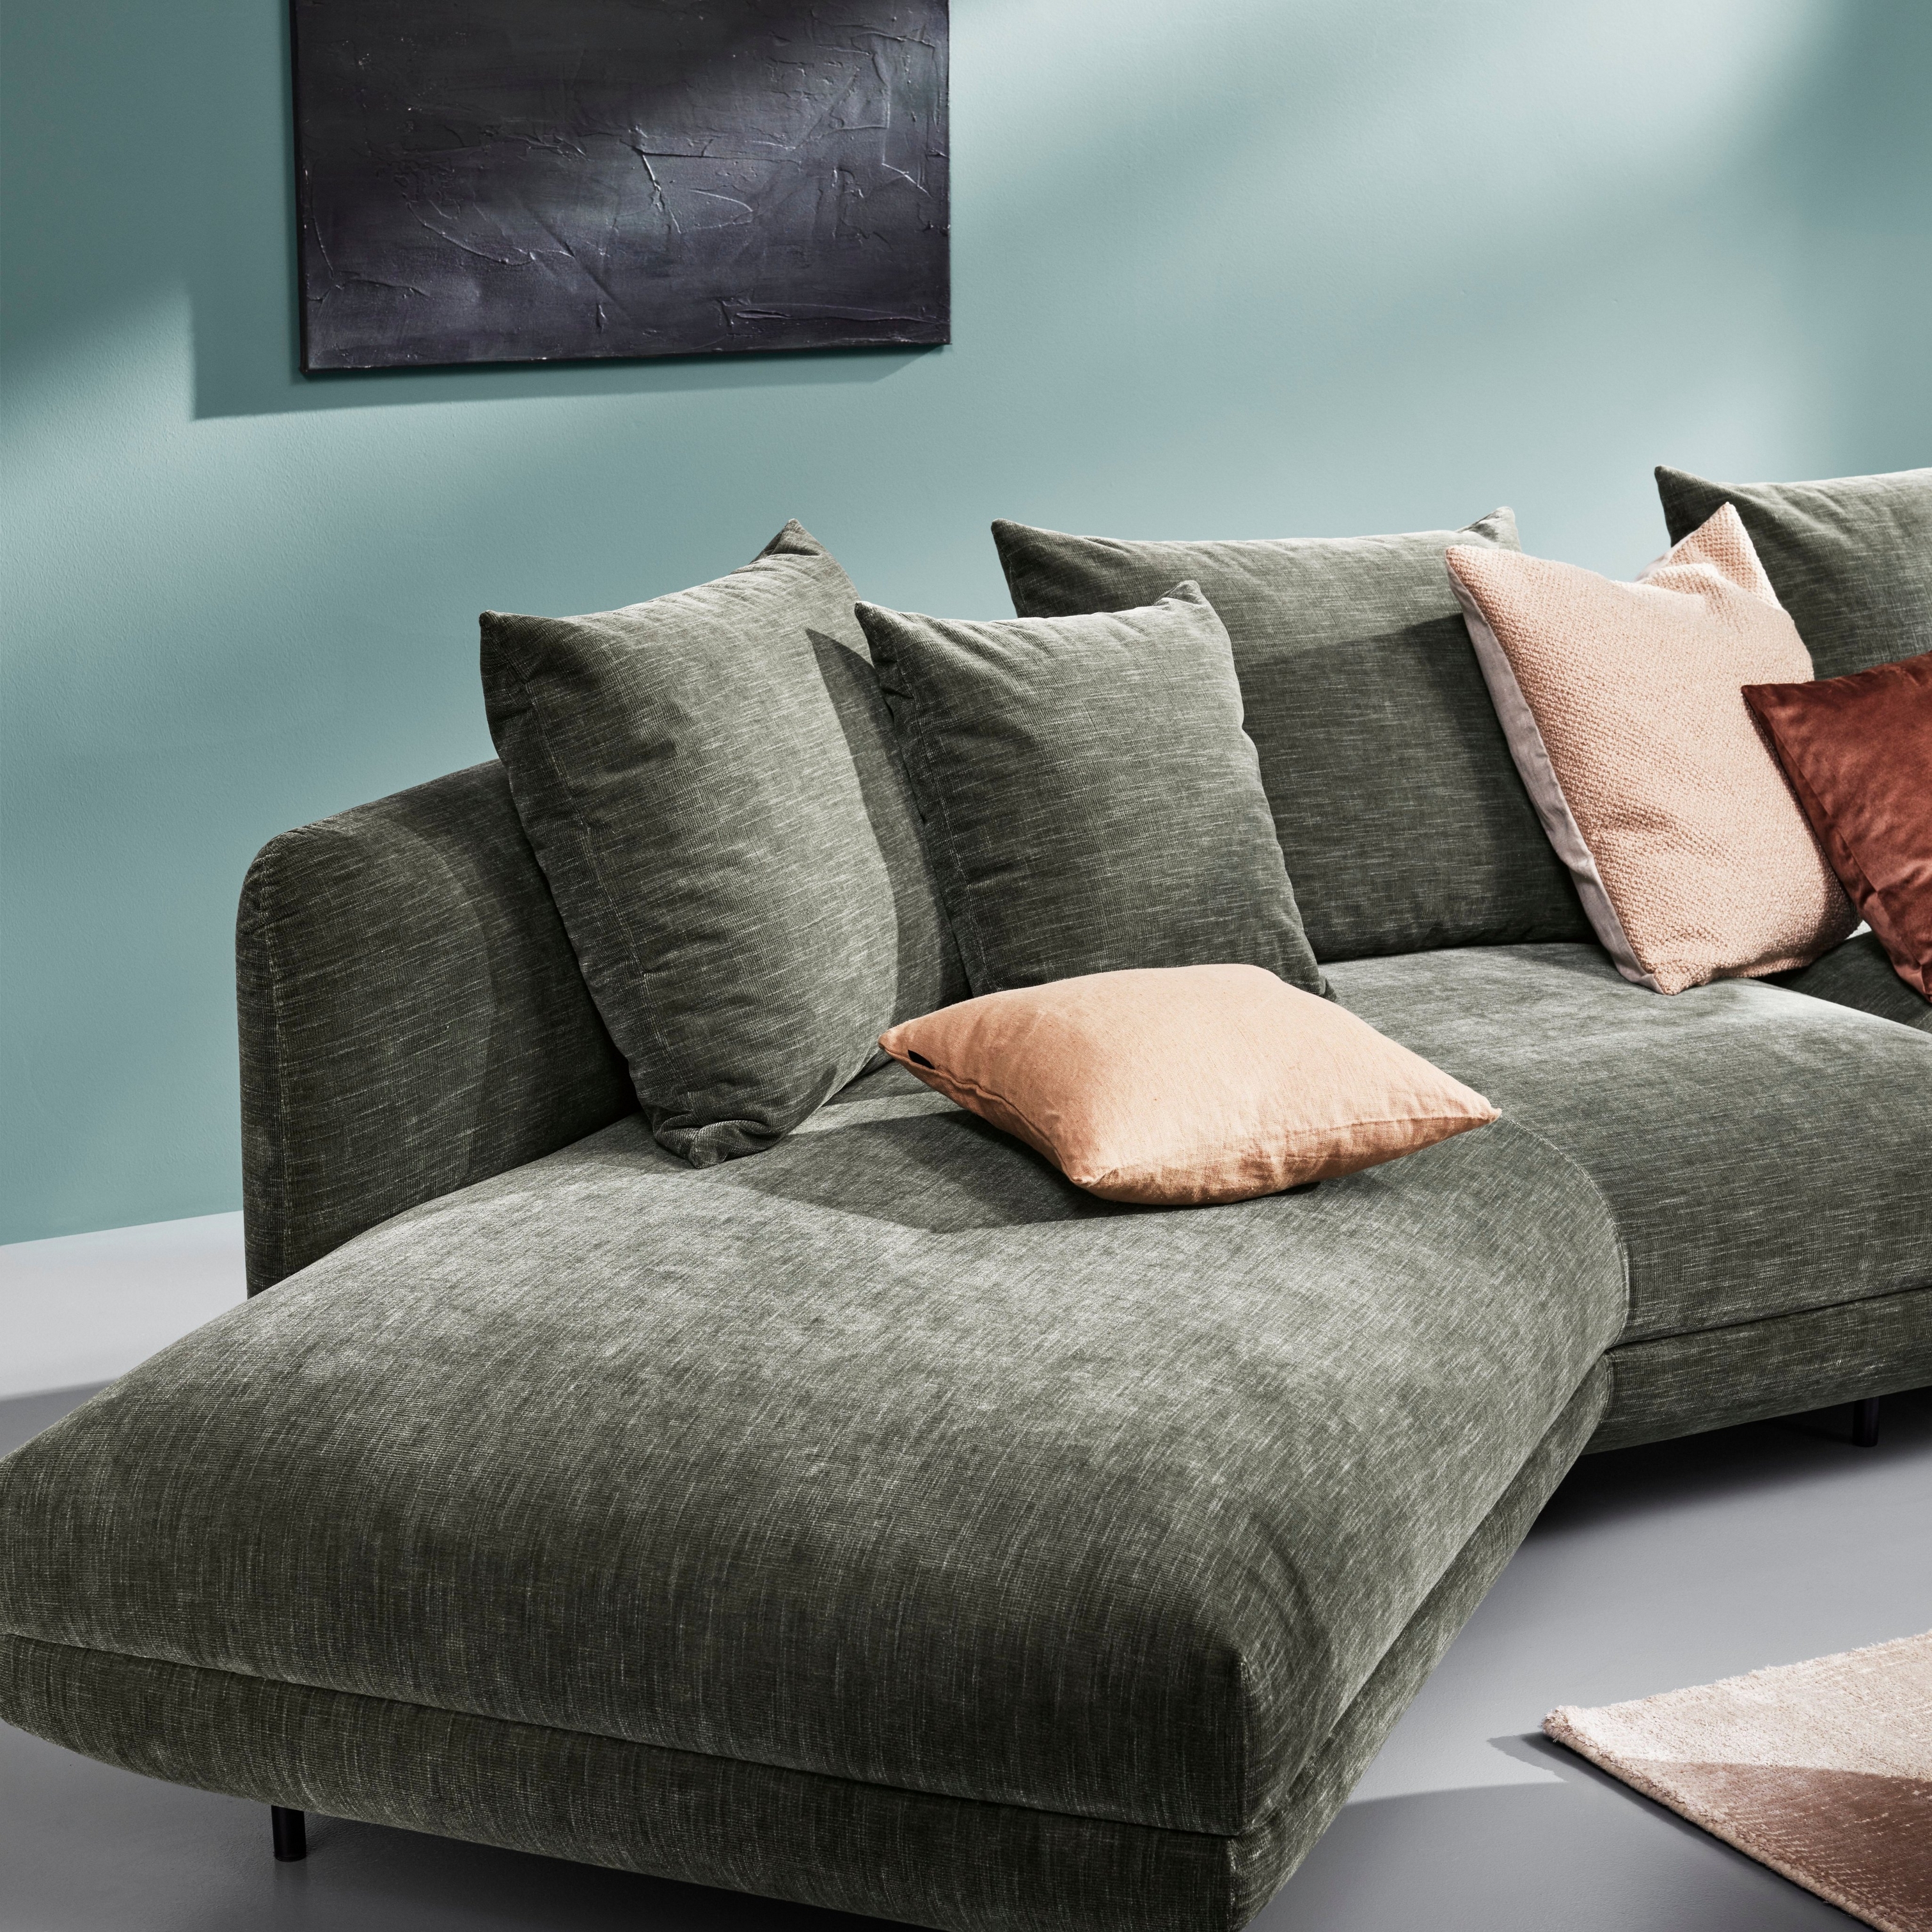 Green sectional Salamanca sofa with pillows against a teal wall with abstract art